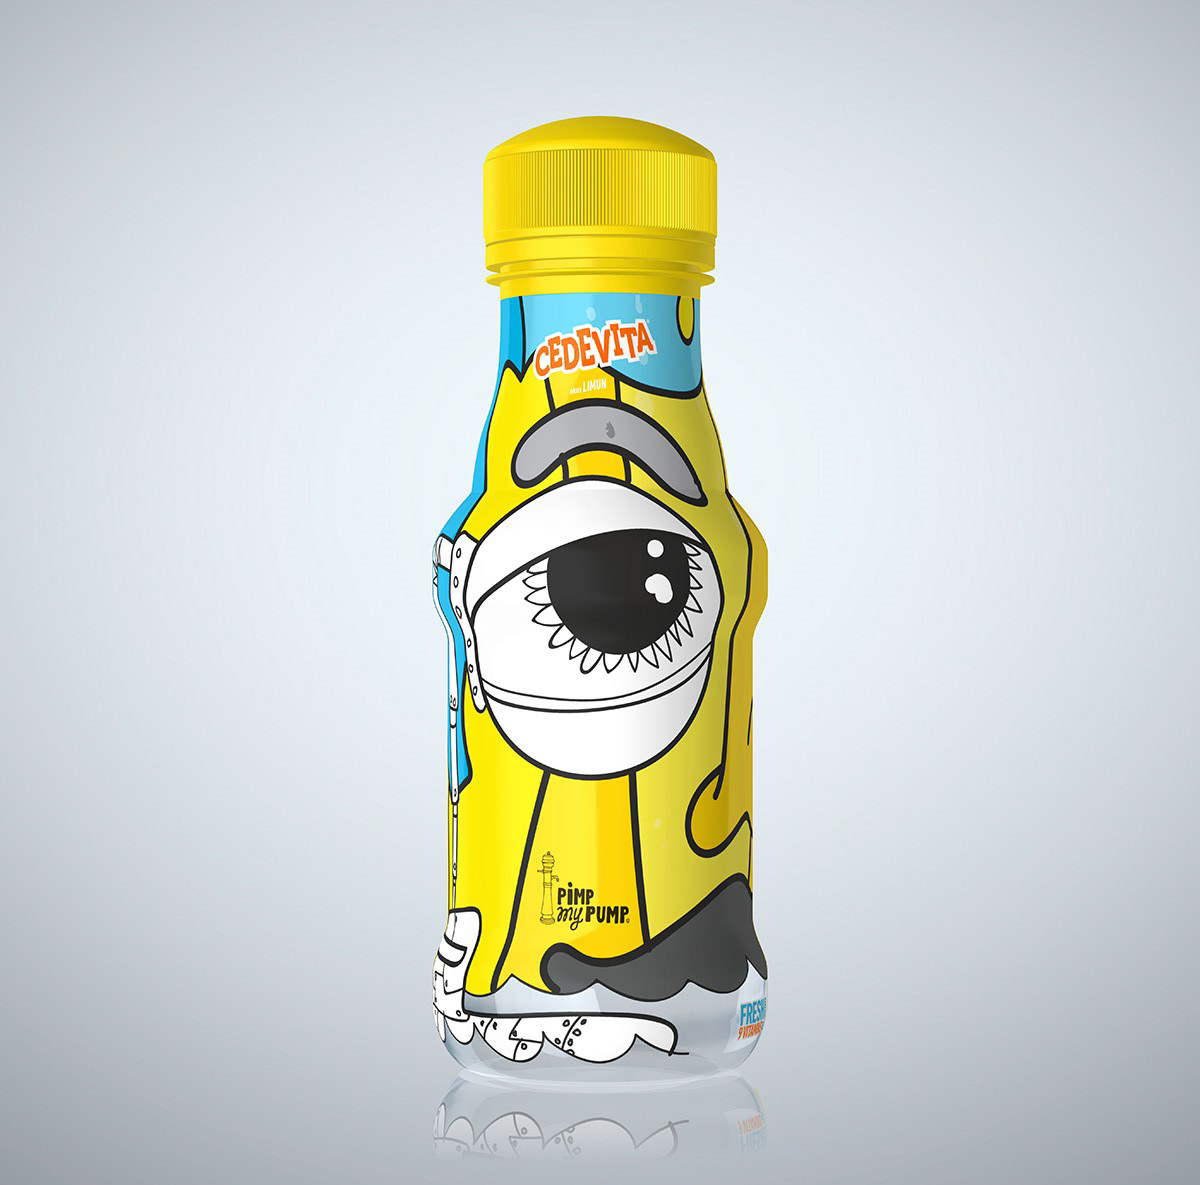 drinks product design  illustrations drawings graphic design  copywrite